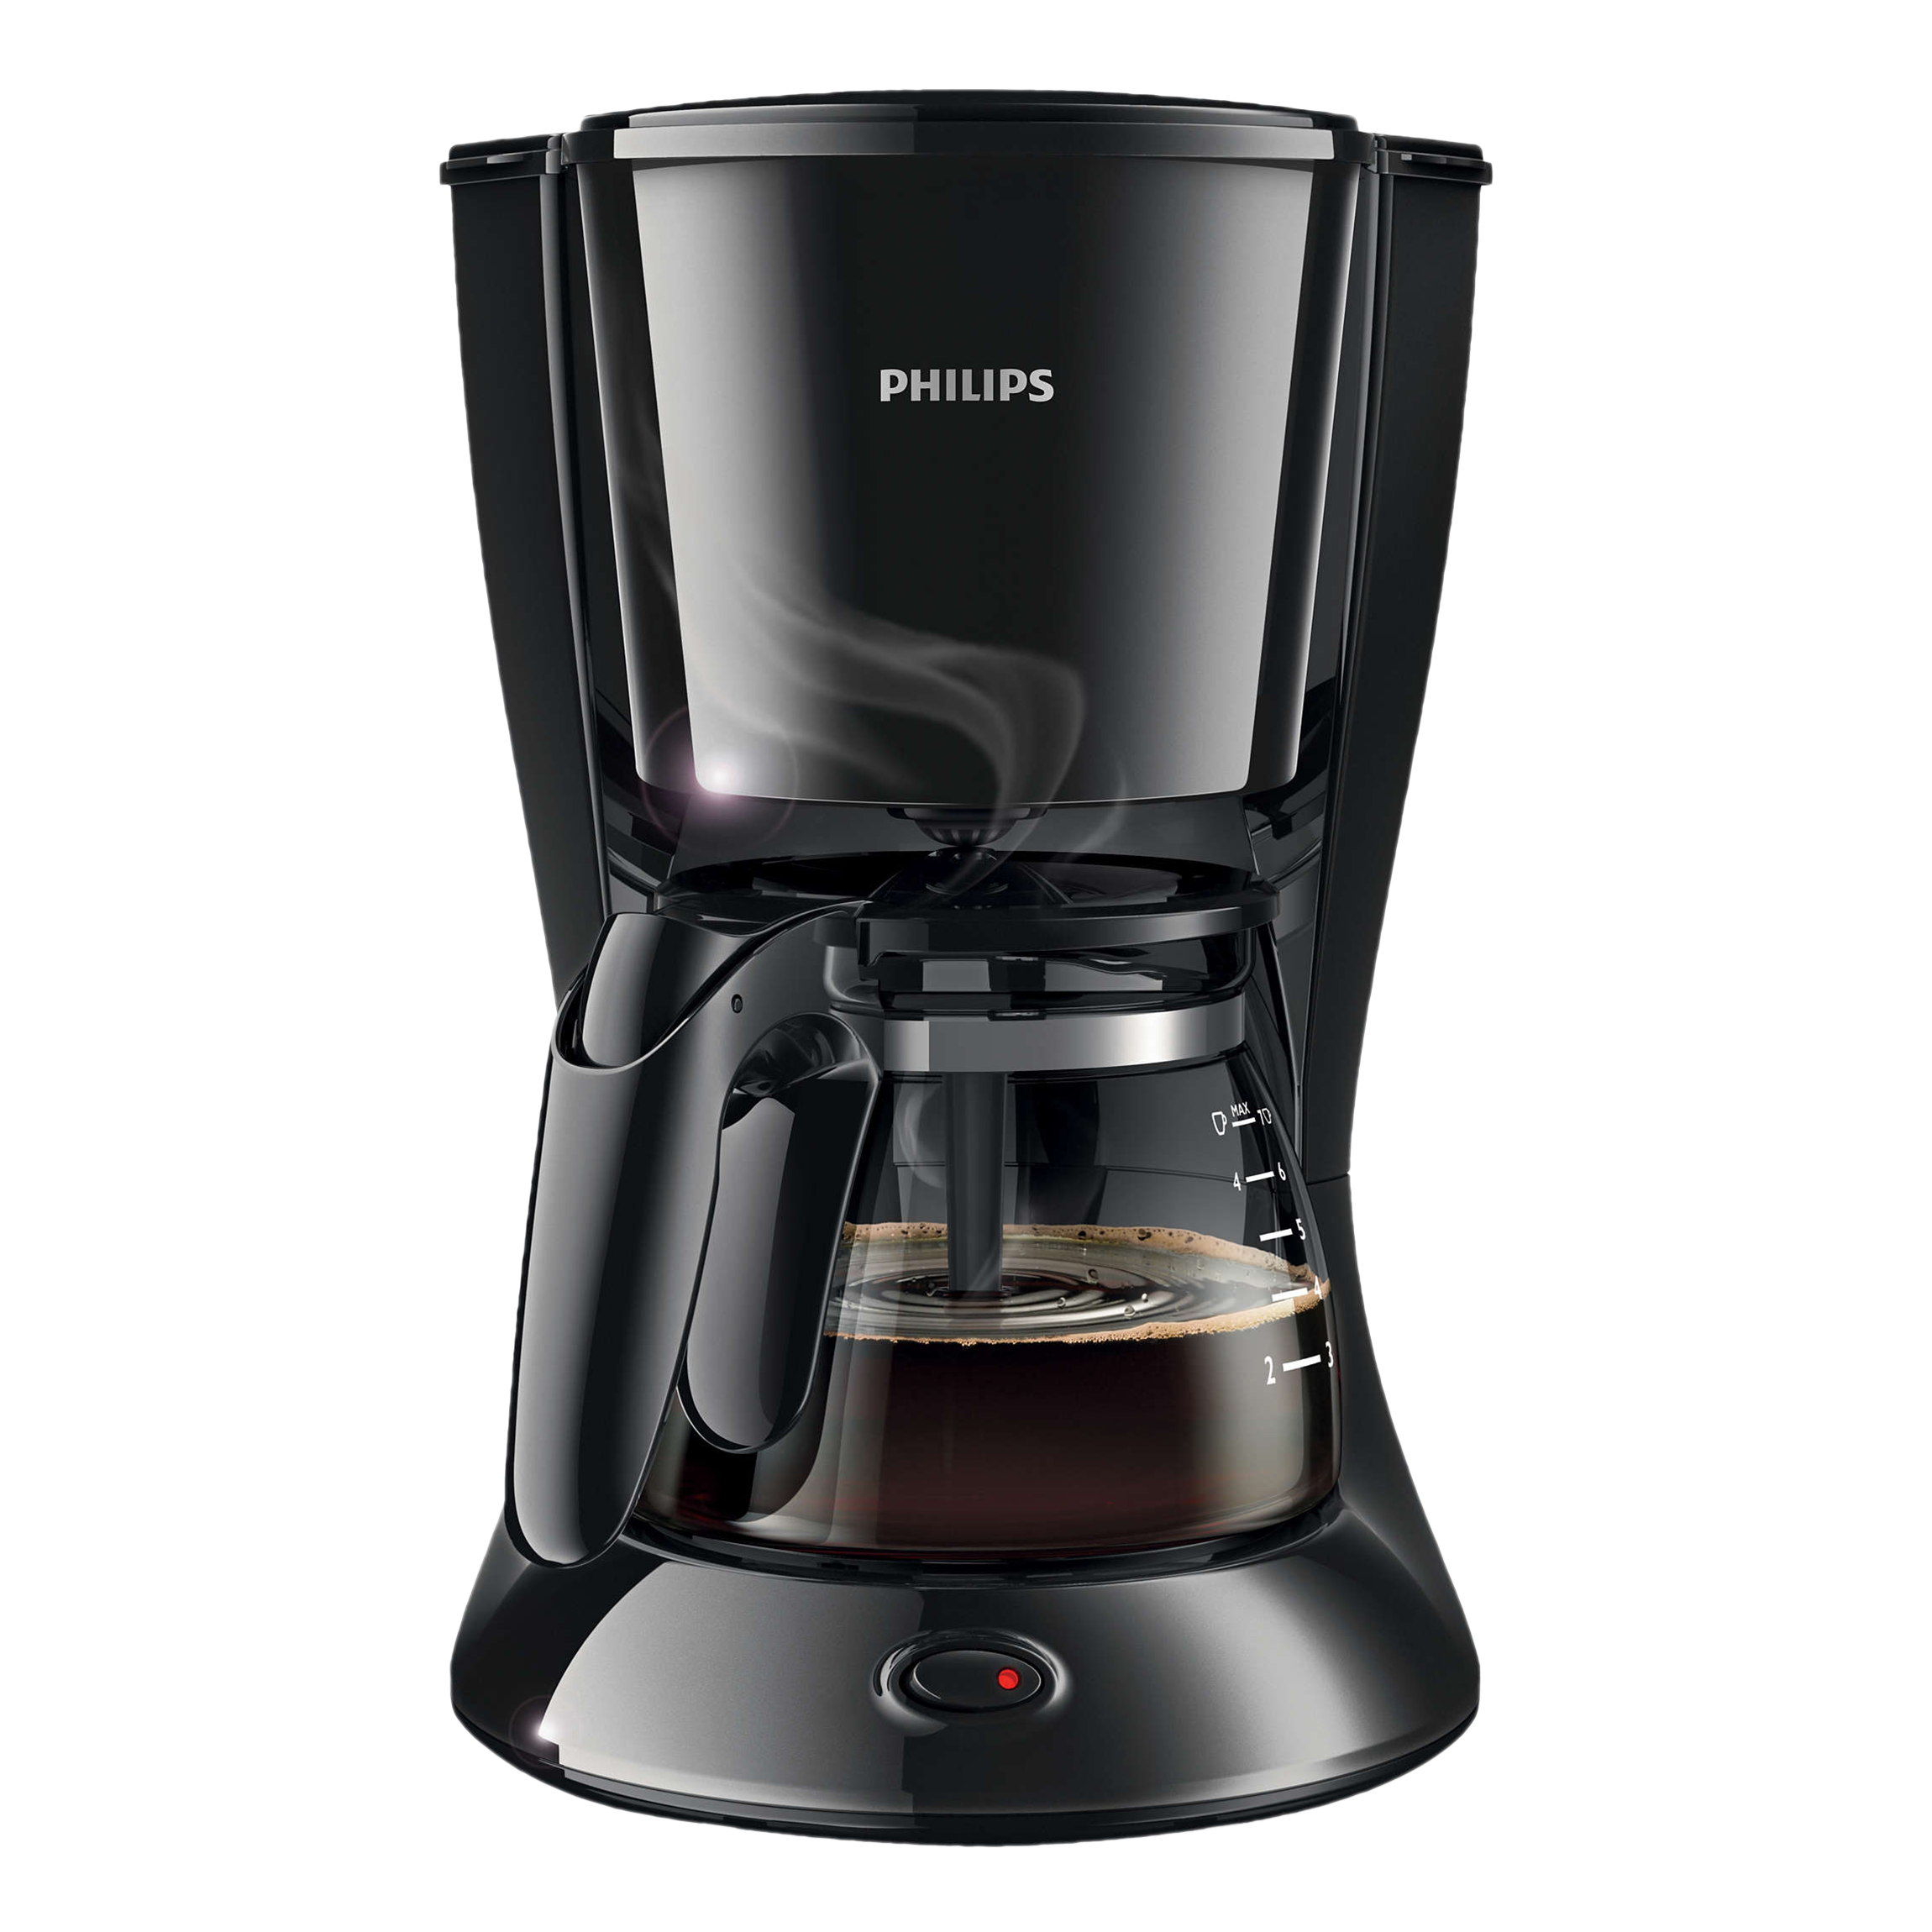 Philip Daily Collection 2-7 Cups Fully Automatic Coffee Maker (HD7432/20, Black)_1